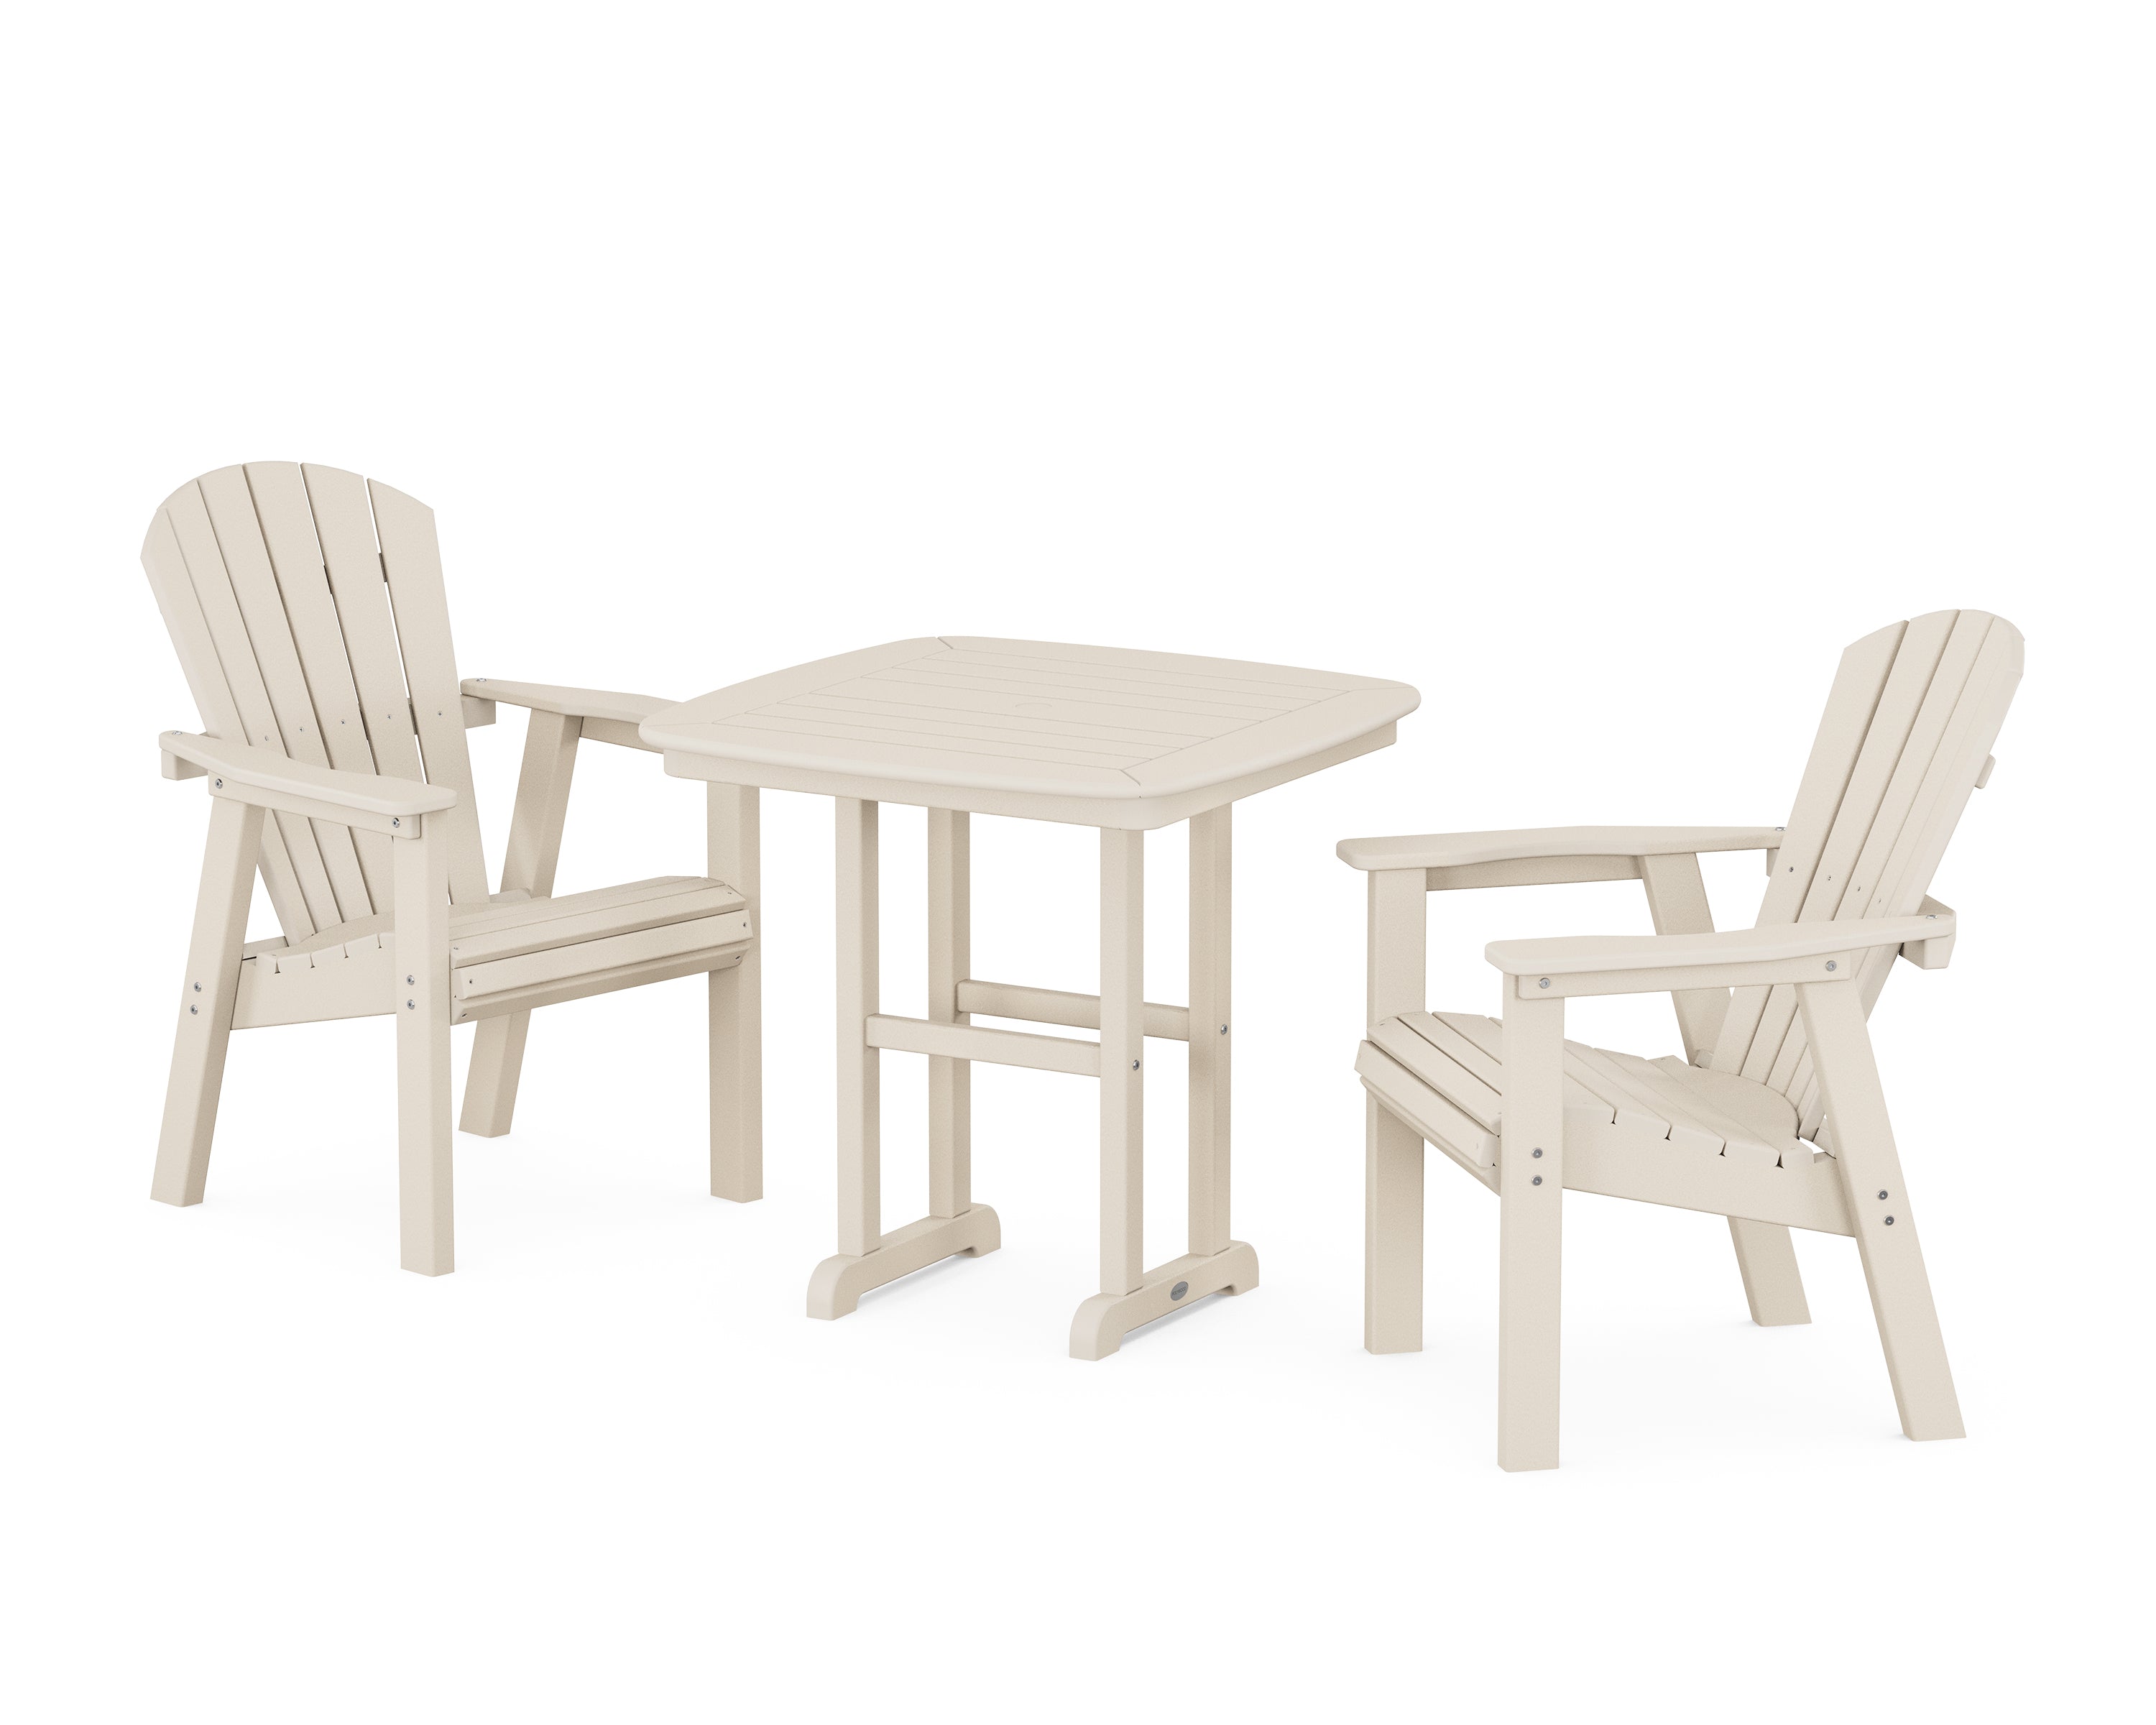 POLYWOOD® Seashell 3-Piece Dining Set in Sand